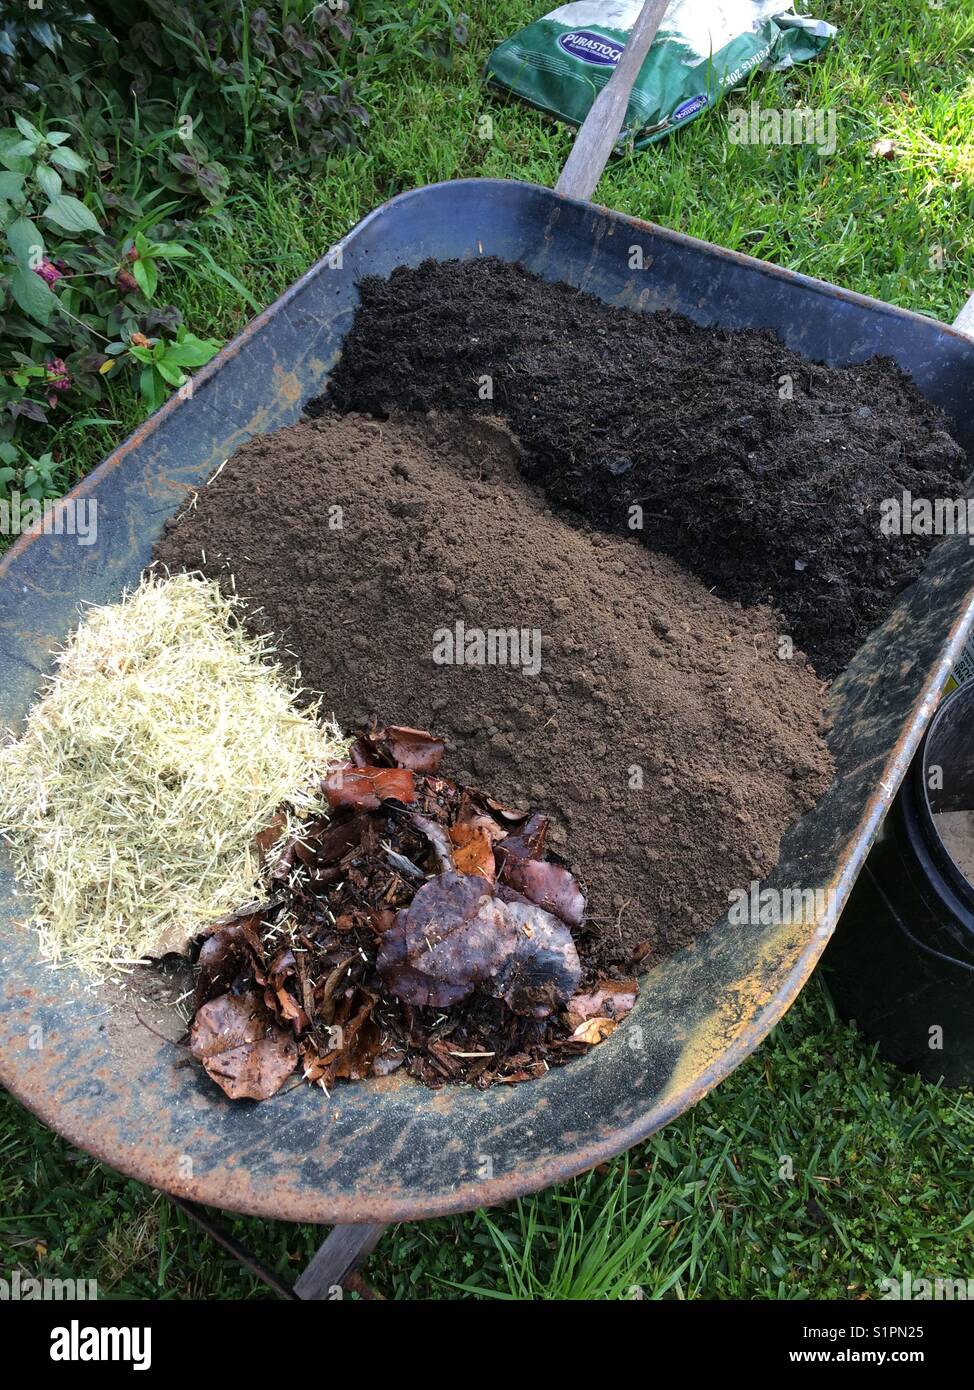 Making Garden Soil Mix In A Wheelbarrow With Compost Manure And Stock Photo Alamy